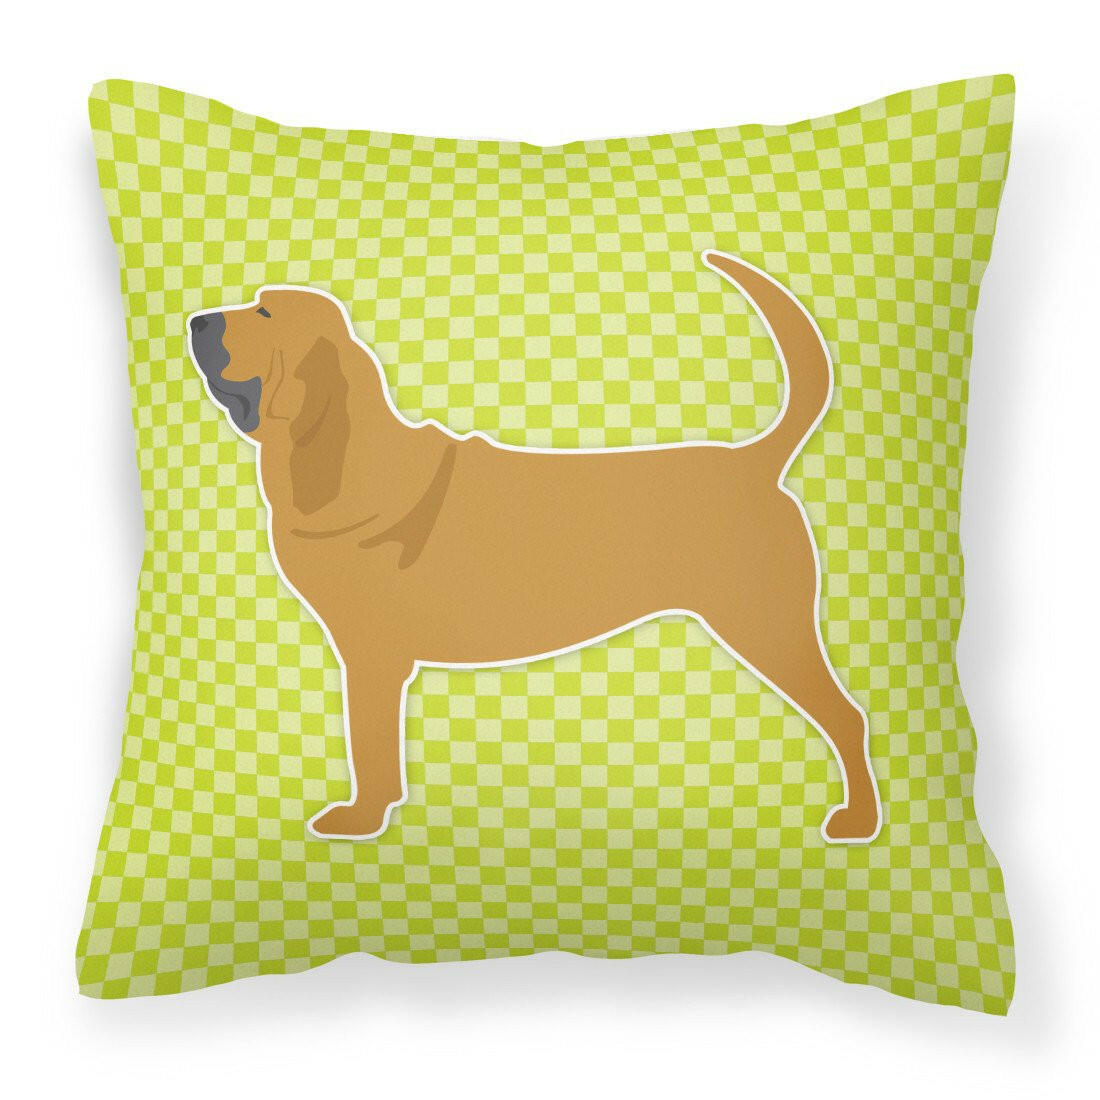 Bloodhound Checkerboard Green Fabric Decorative Pillow BB3784PW1818 by Caroline's Treasures